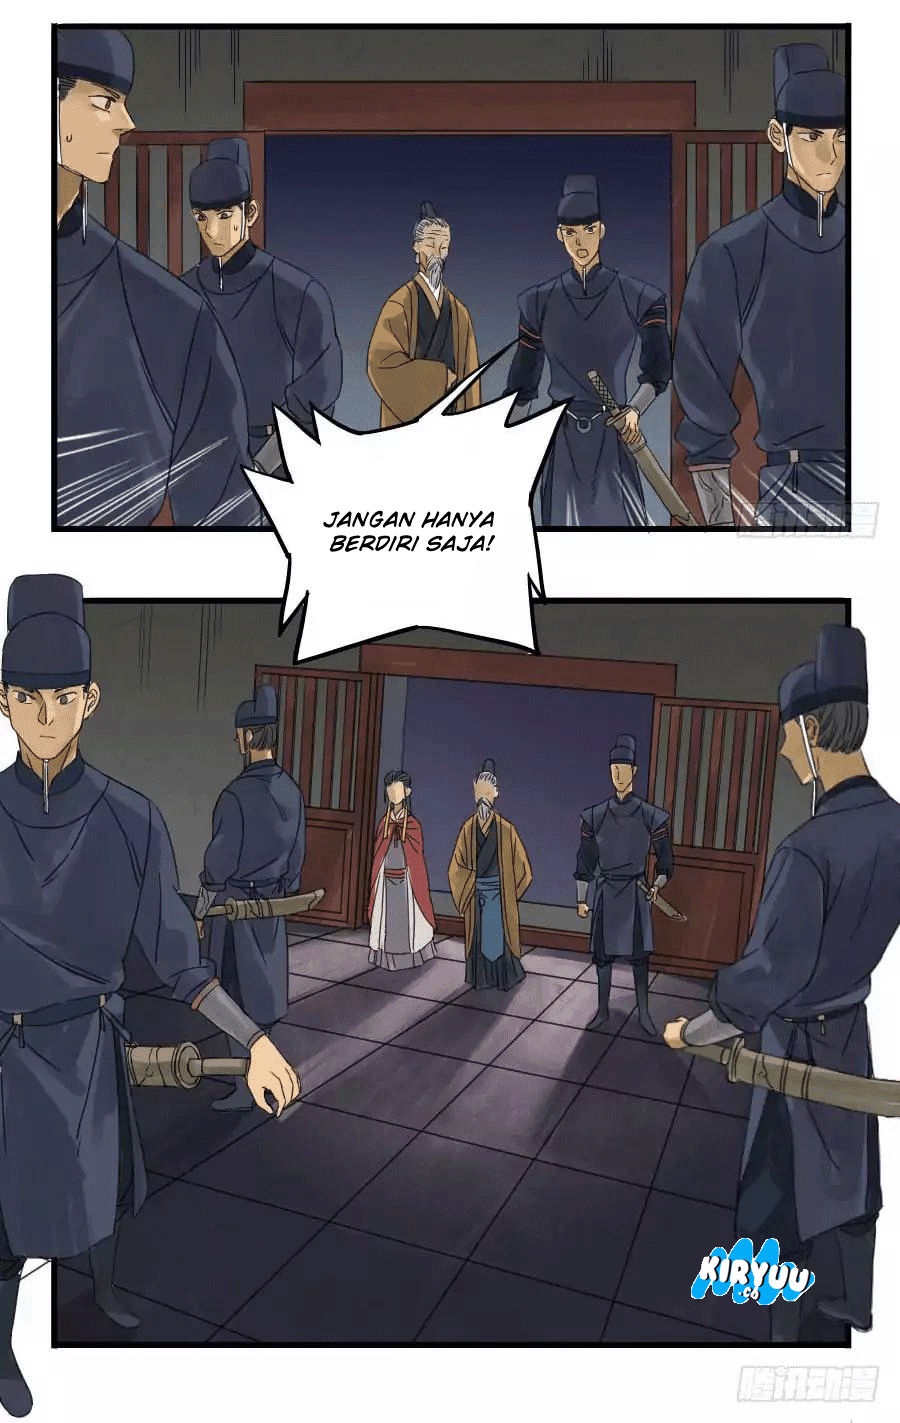 Martial Legacy Chapter 04